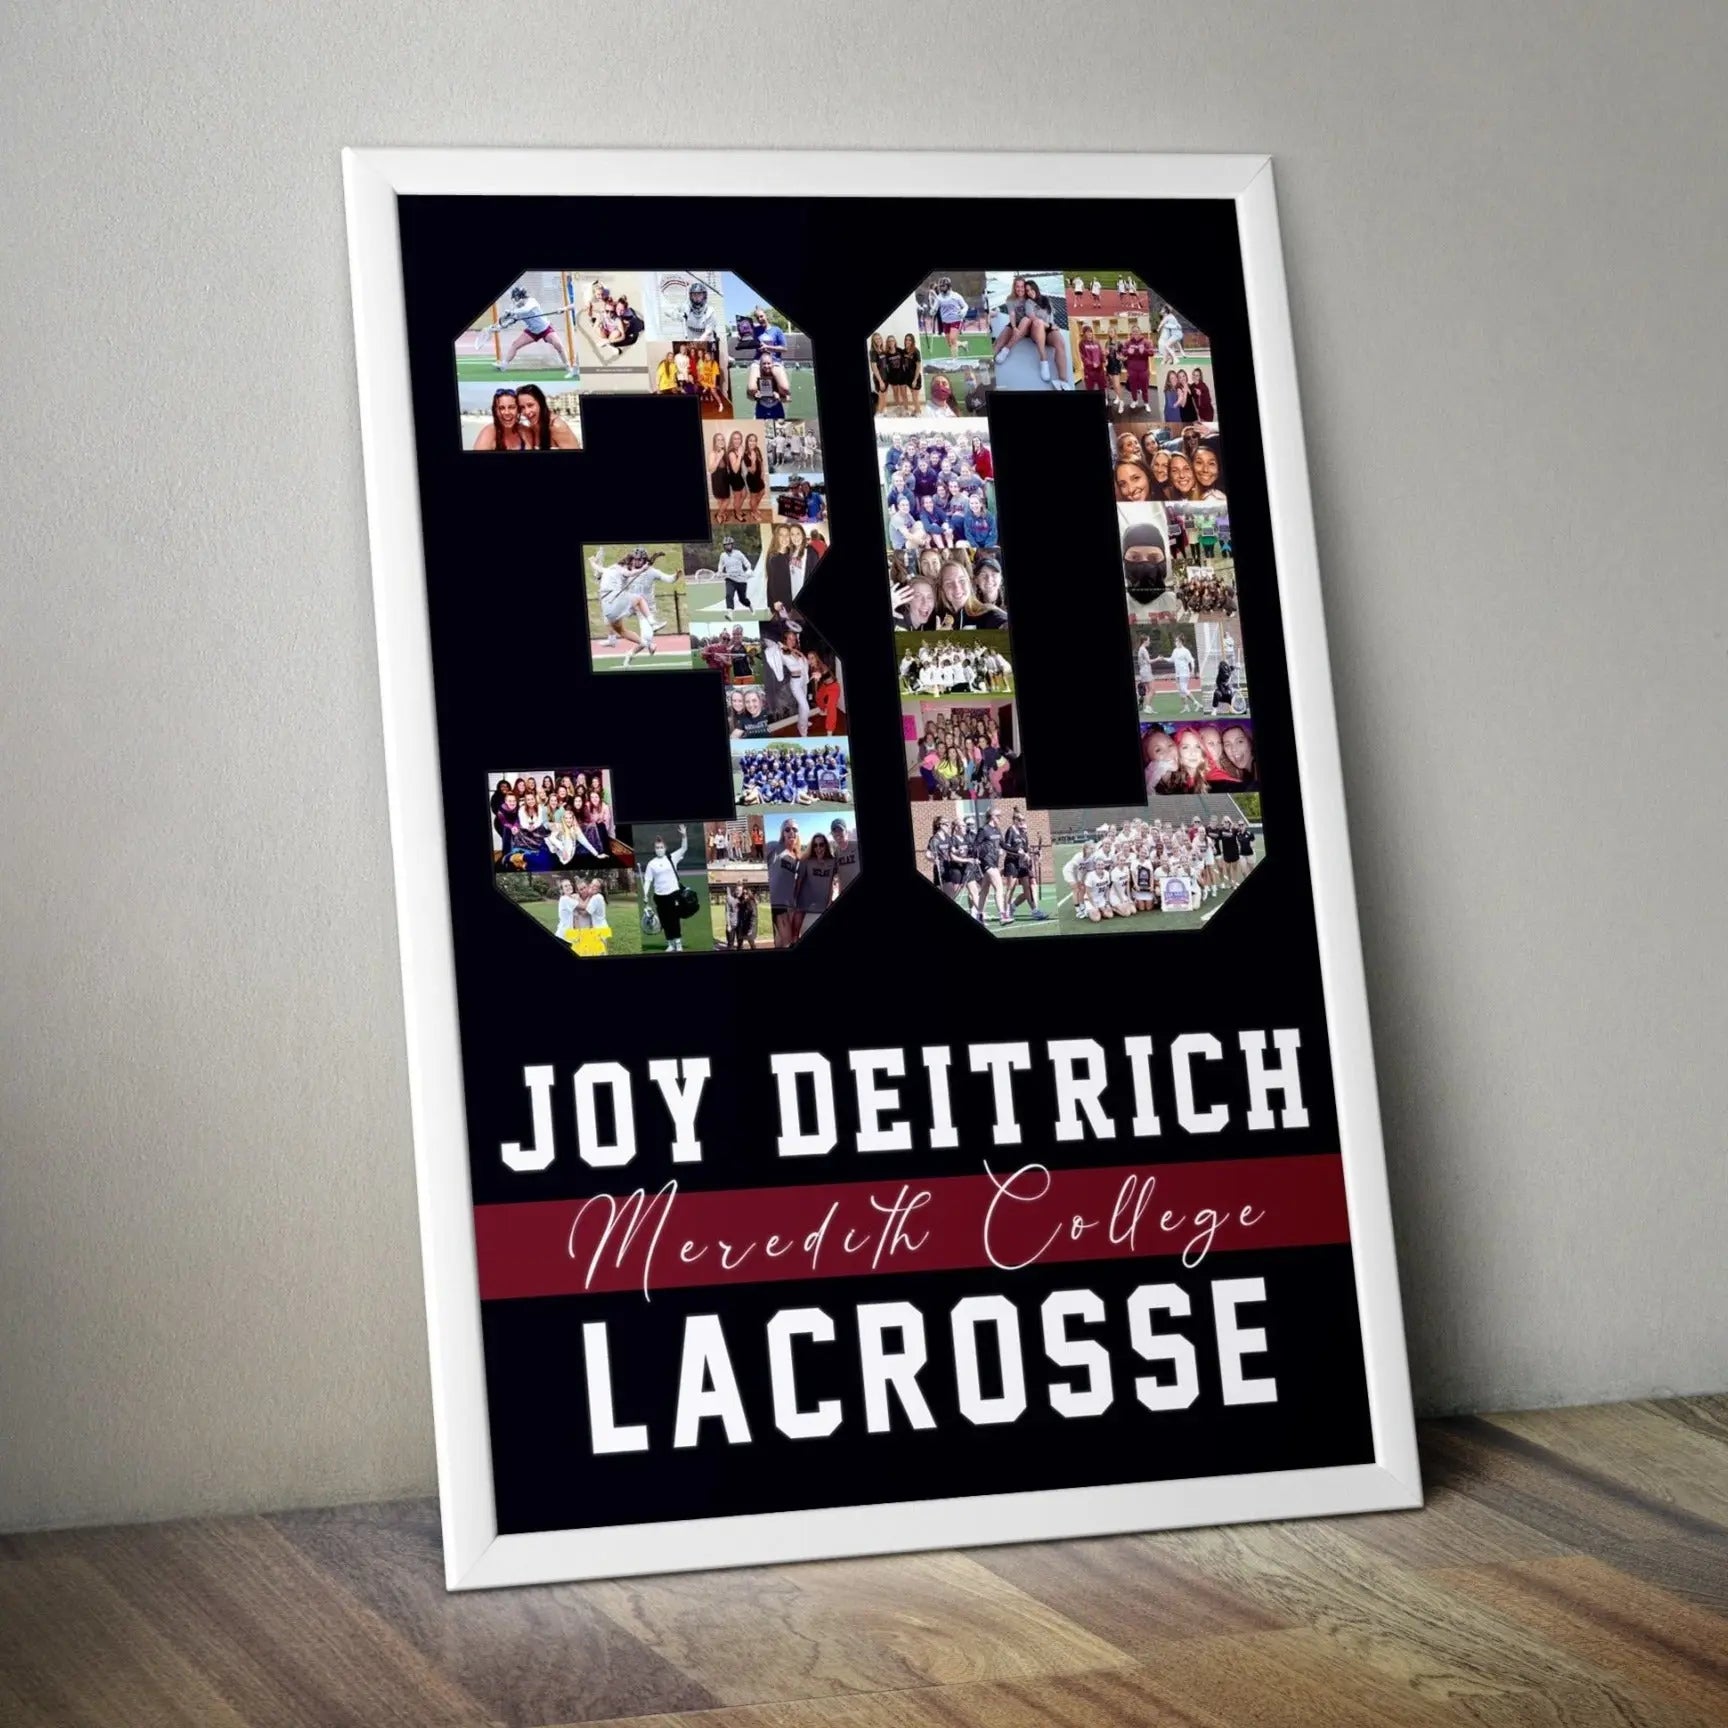 15 Football Poster Ideas For Game Day, High School Games & Display